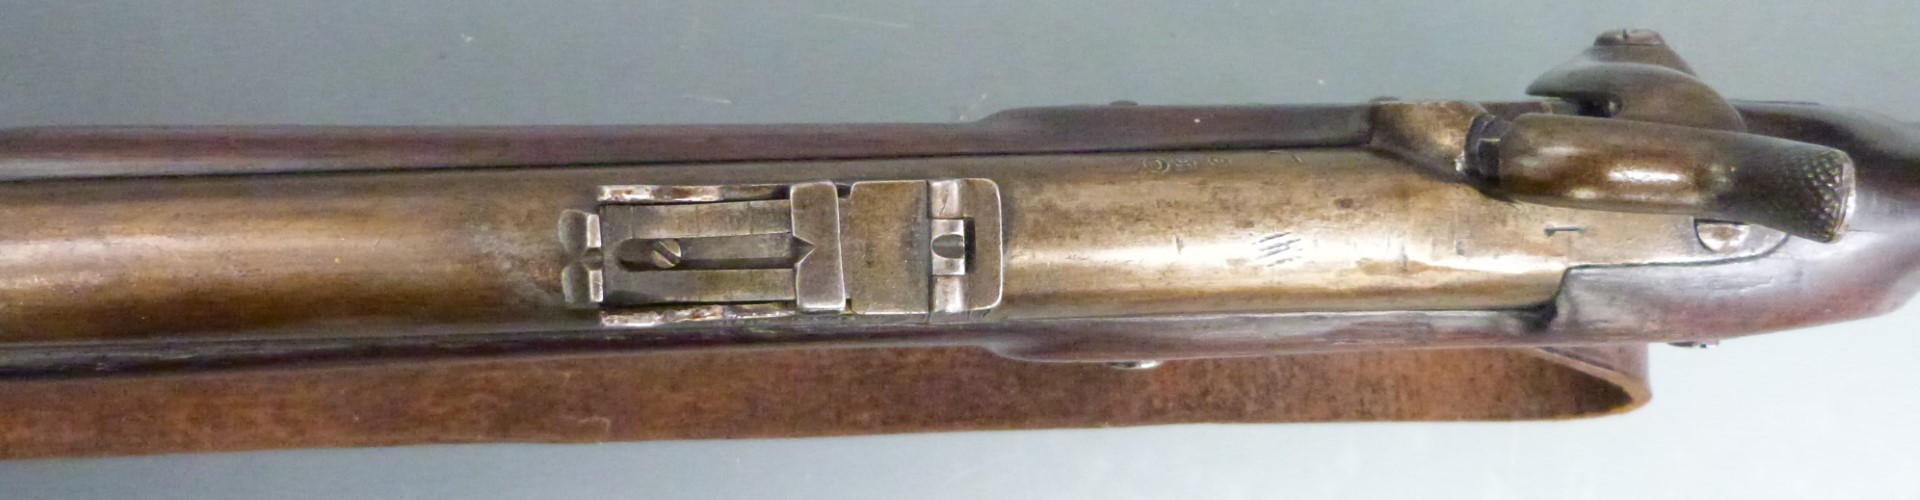 Enfield pattern three band percussion hammer action gun with 1827 Tower and crown over VR cypher - Image 9 of 9